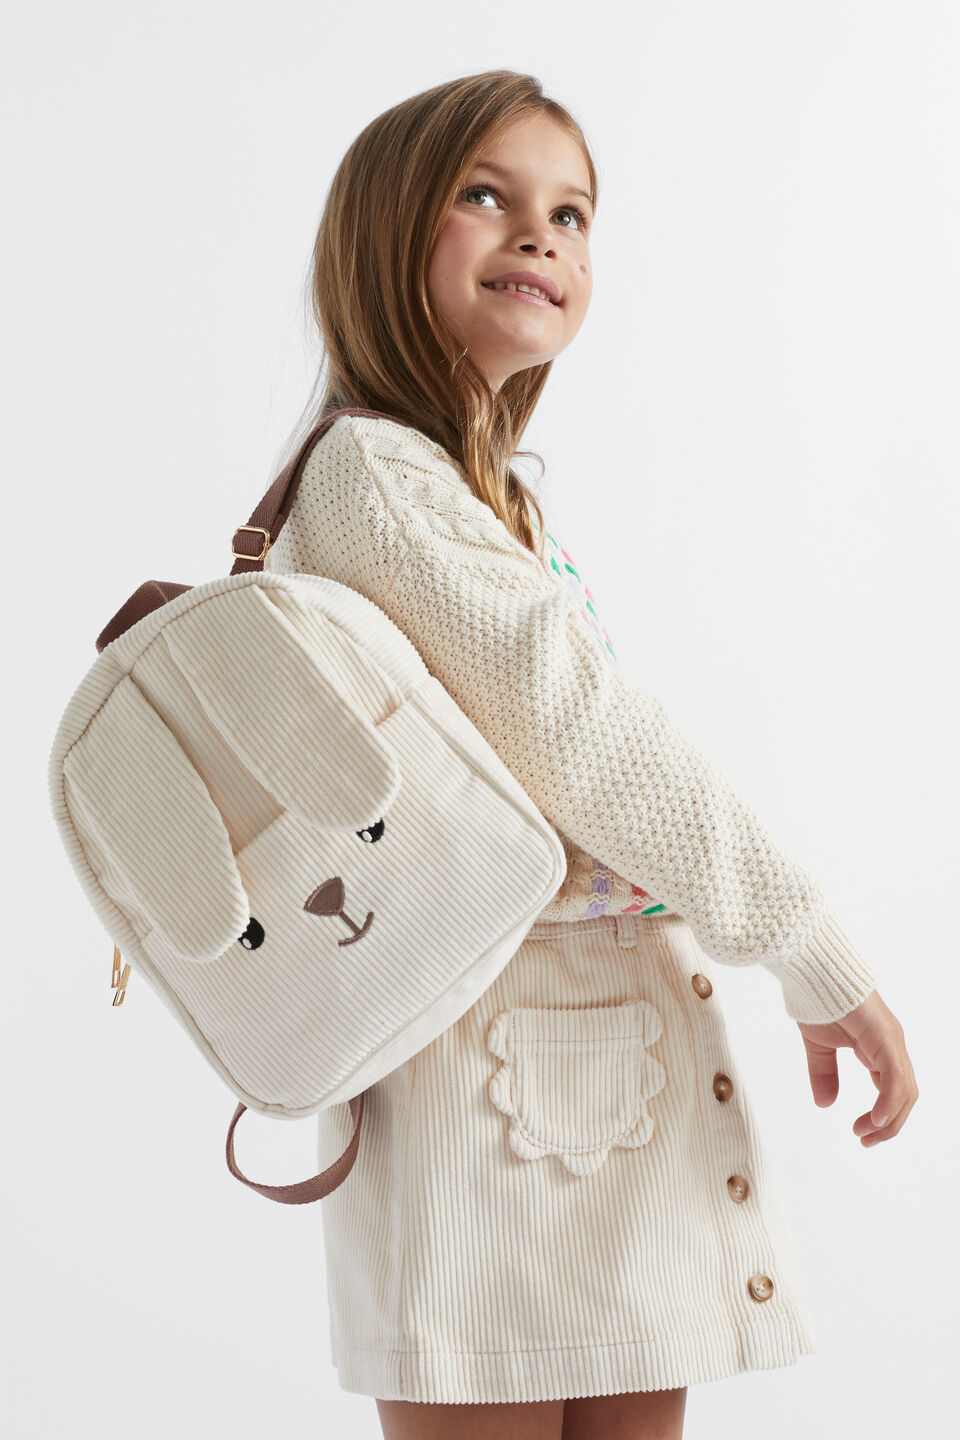 Cord Bunny Backpack  Multi